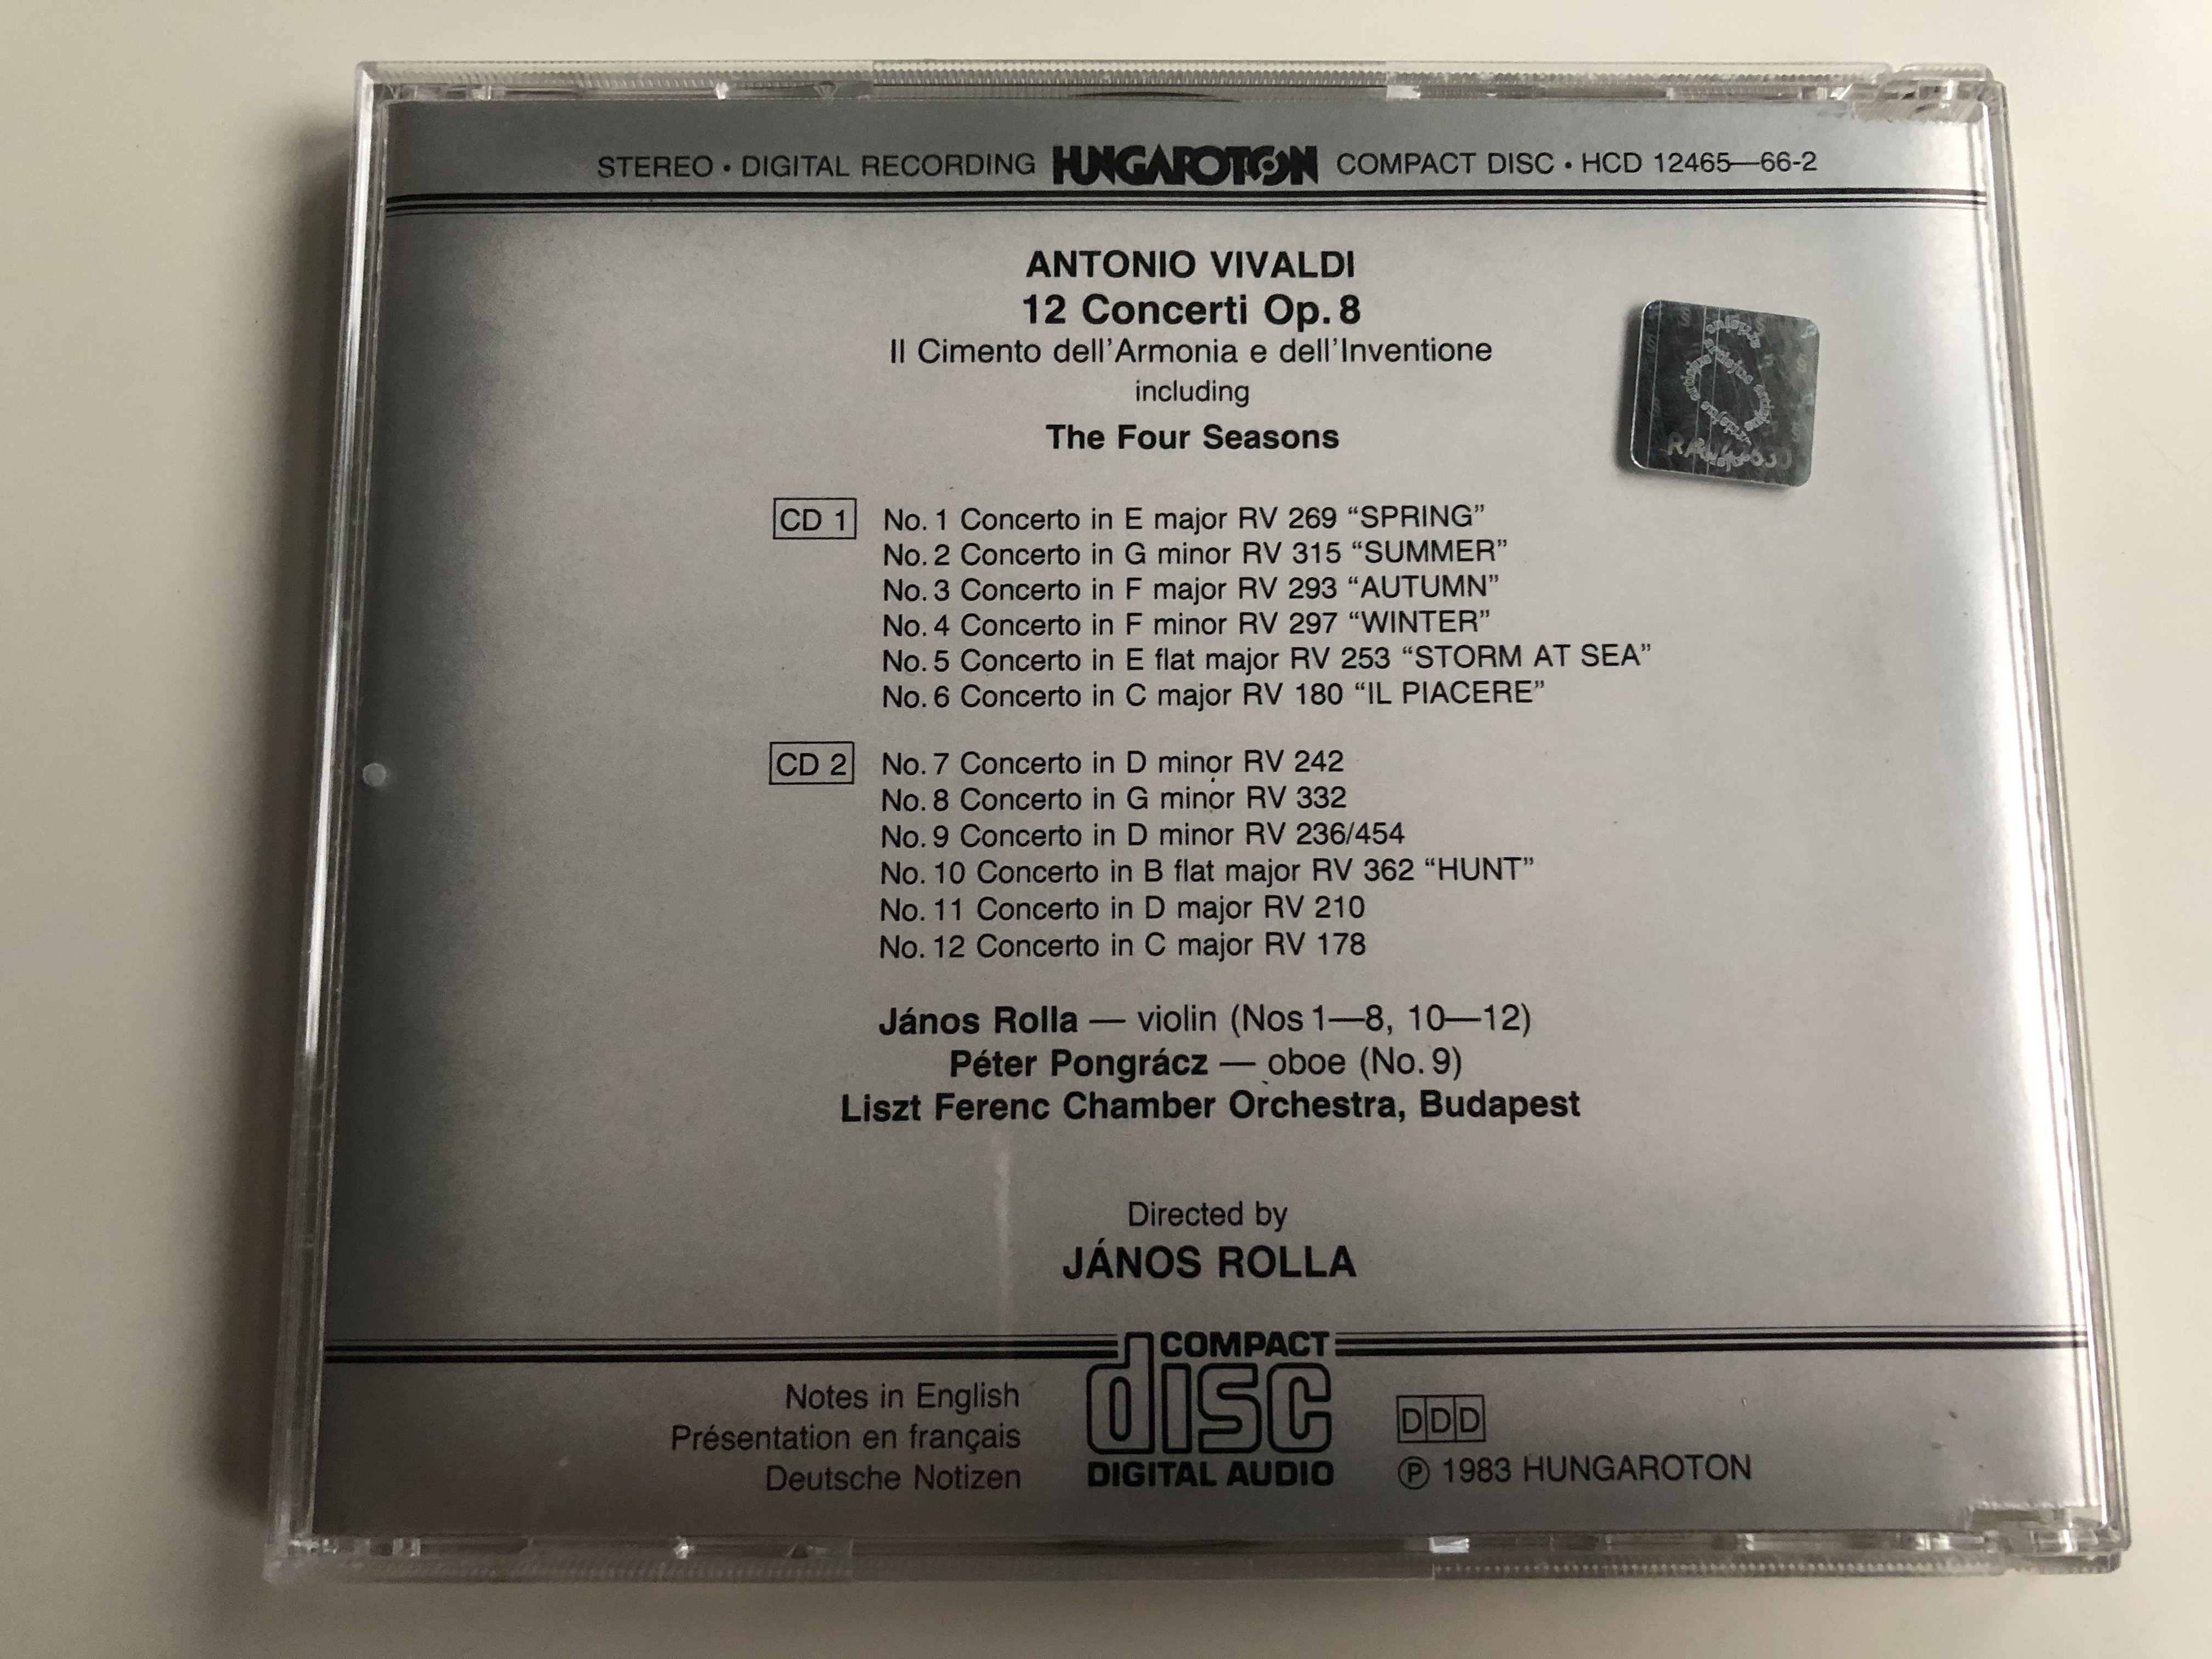 vivaldi-12-concerti-op.-8-liszt-ferenc-chamber-orchestra-budapest-directed-by-janos-rolla-hungaroton-2x-audio-cd-1995-stereo-hcd-12465-66-2-5-.jpg